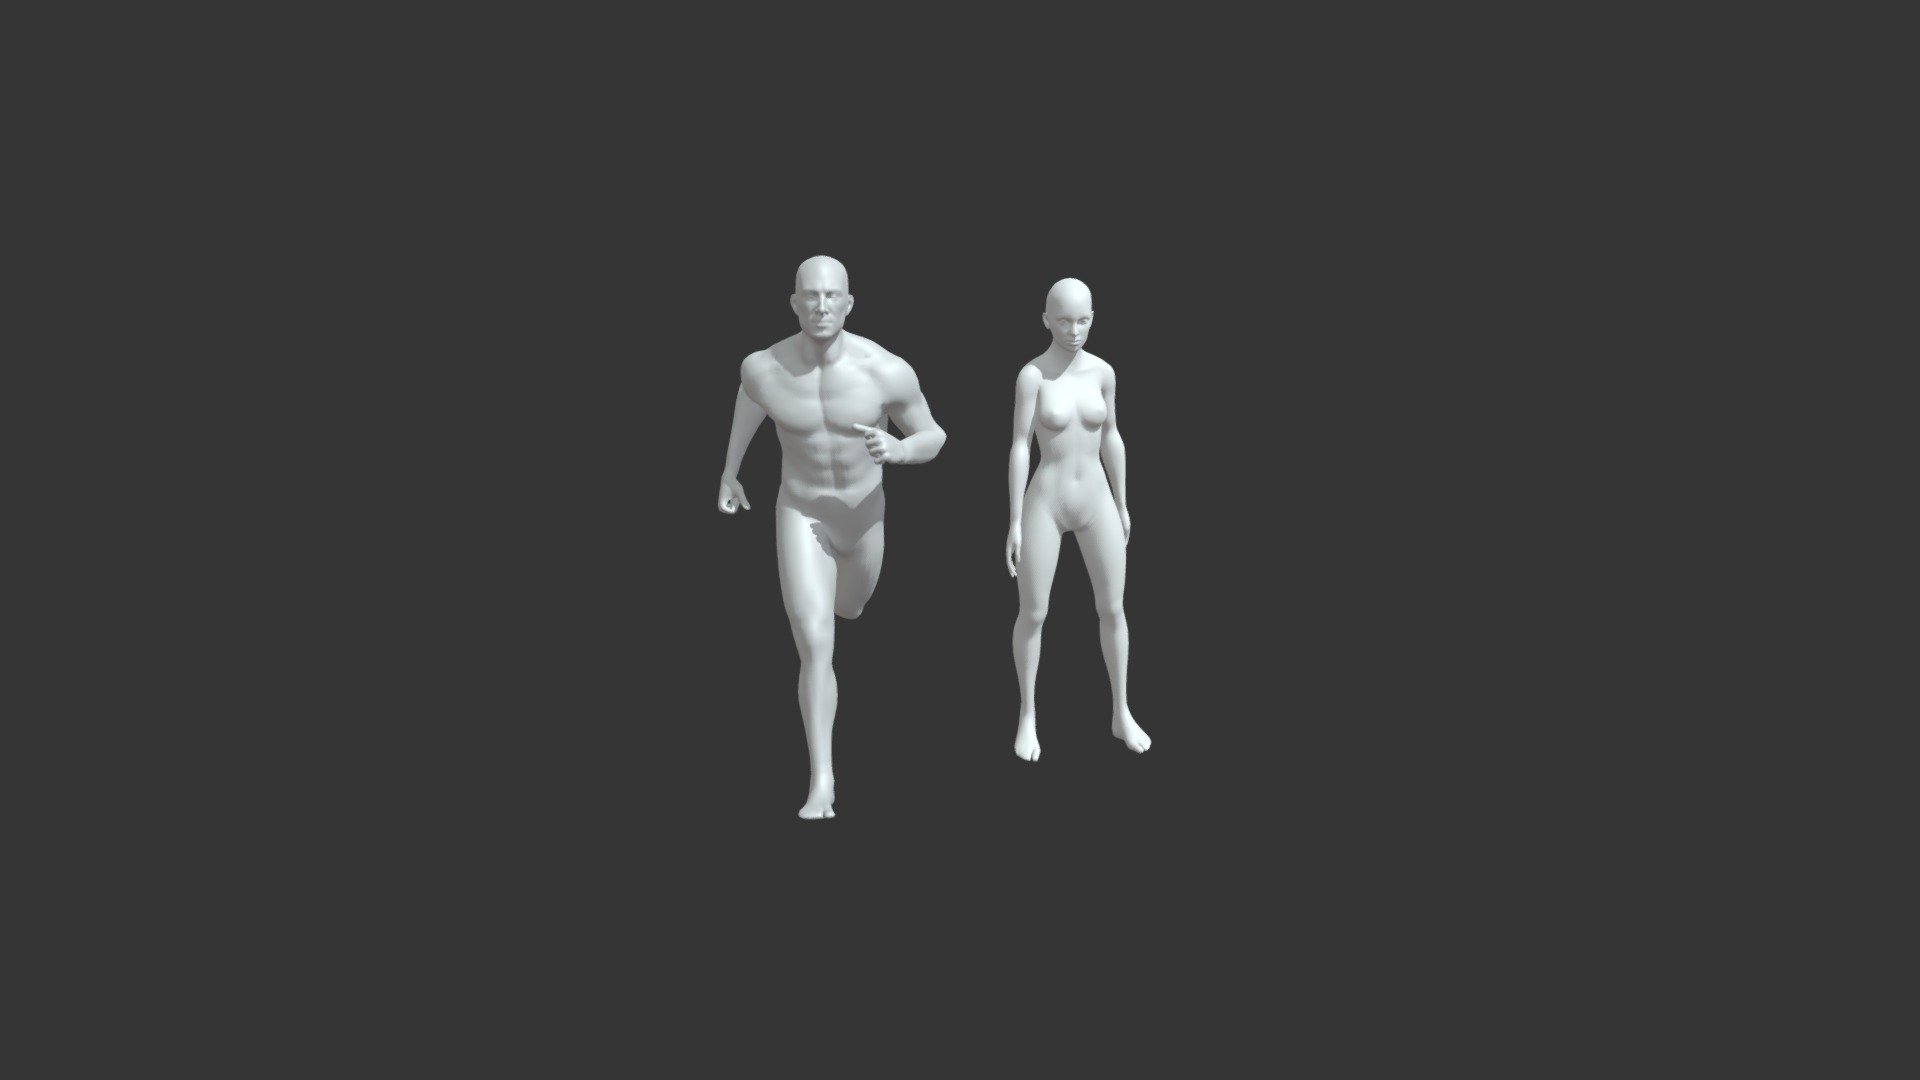 Male and Female Body Base Mesh Animated and Rigged 3D Model 20k Polygons consists of 2 models:  




Male Body Base Mesh Animated and Rigged 3D Model 20k Polygons (20,026 Polygons, 19,611 Vertices)

Female Body Base Mesh Animated and Rigged 3D Model 20k Polygons (20,486 Polygons, 20,258 Vertices)

Good topology ready for animation.  

Technical details:




File formats included in the package are: FBX, OBJ, GLB, PLY, STL, ABC, DAE, BLEND, gLTF (generated), USDZ (generated)

Native software file format: BLEND

Both models are rigged and animated.

6 animations are included: idle, walk, run, squat, push-up, sit down &amp; get up. All animations are full cycles.

Only following formats contain rig and animation: BLEND, FBX, GLTF/GLB
 - Male Female Body Base Mesh Animated 20k Poly - Buy Royalty Free 3D model by 3DDisco 3d model